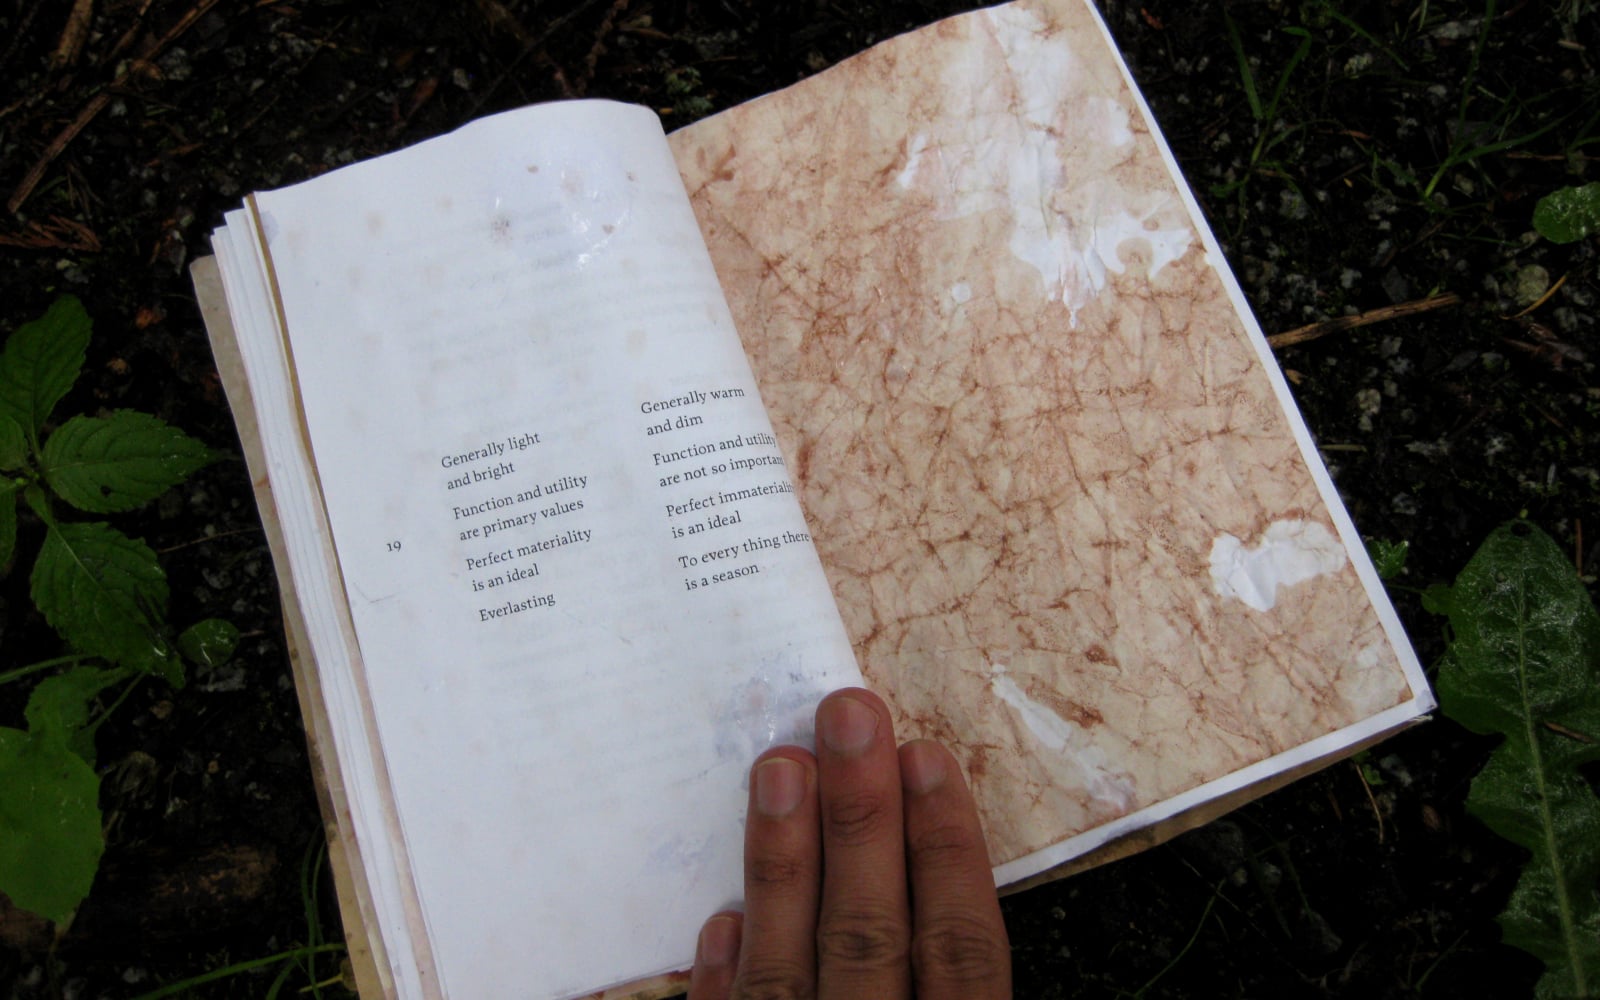 an open book on a wet forest floor. The left page contains text, the right page is blank and has been treated with ink.